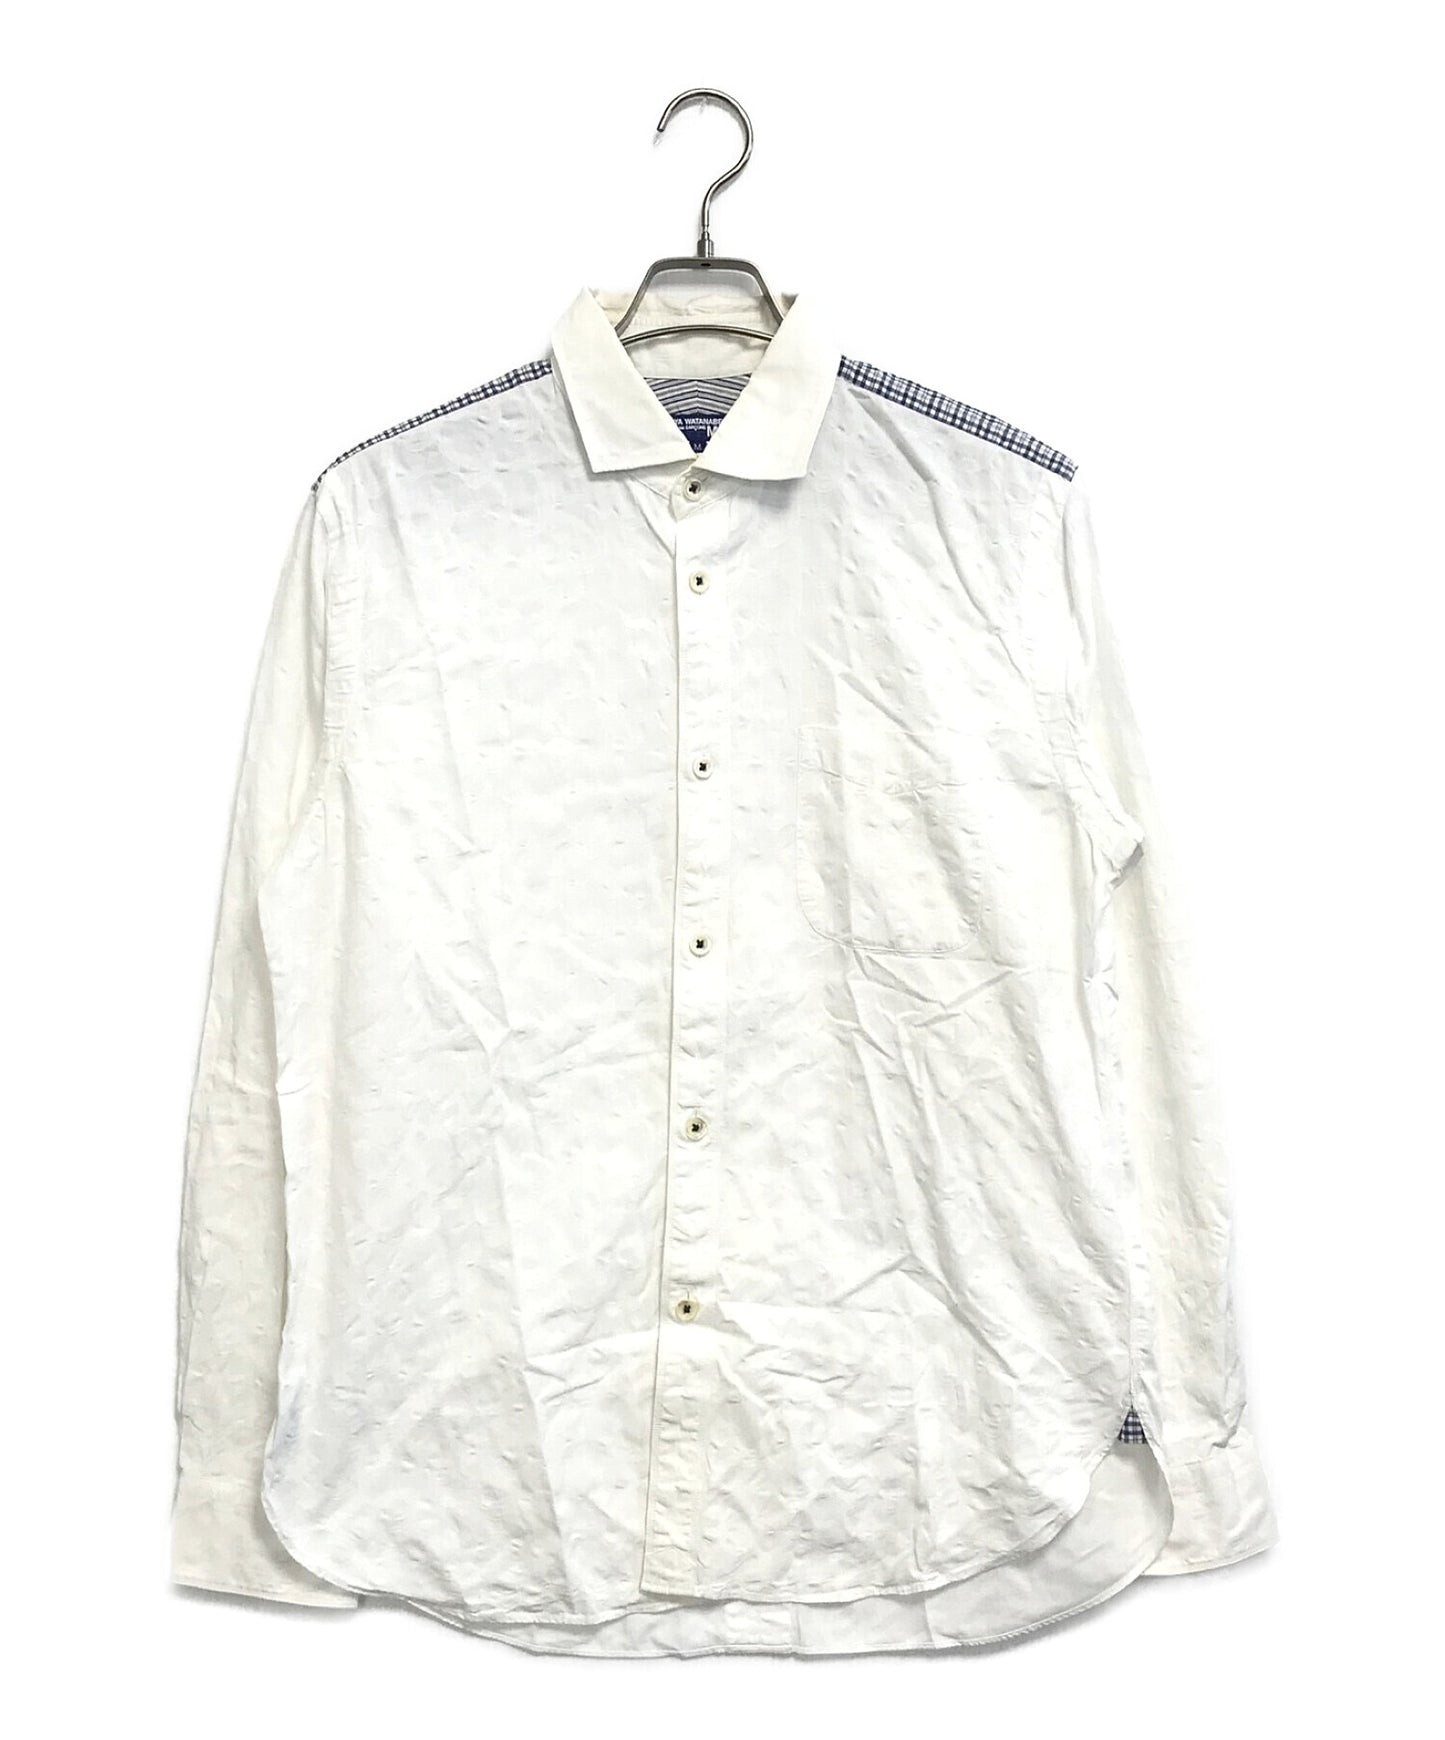 Comme des Garcons Junya Watanabe Man Switched 디자인 셔츠 WD-B004